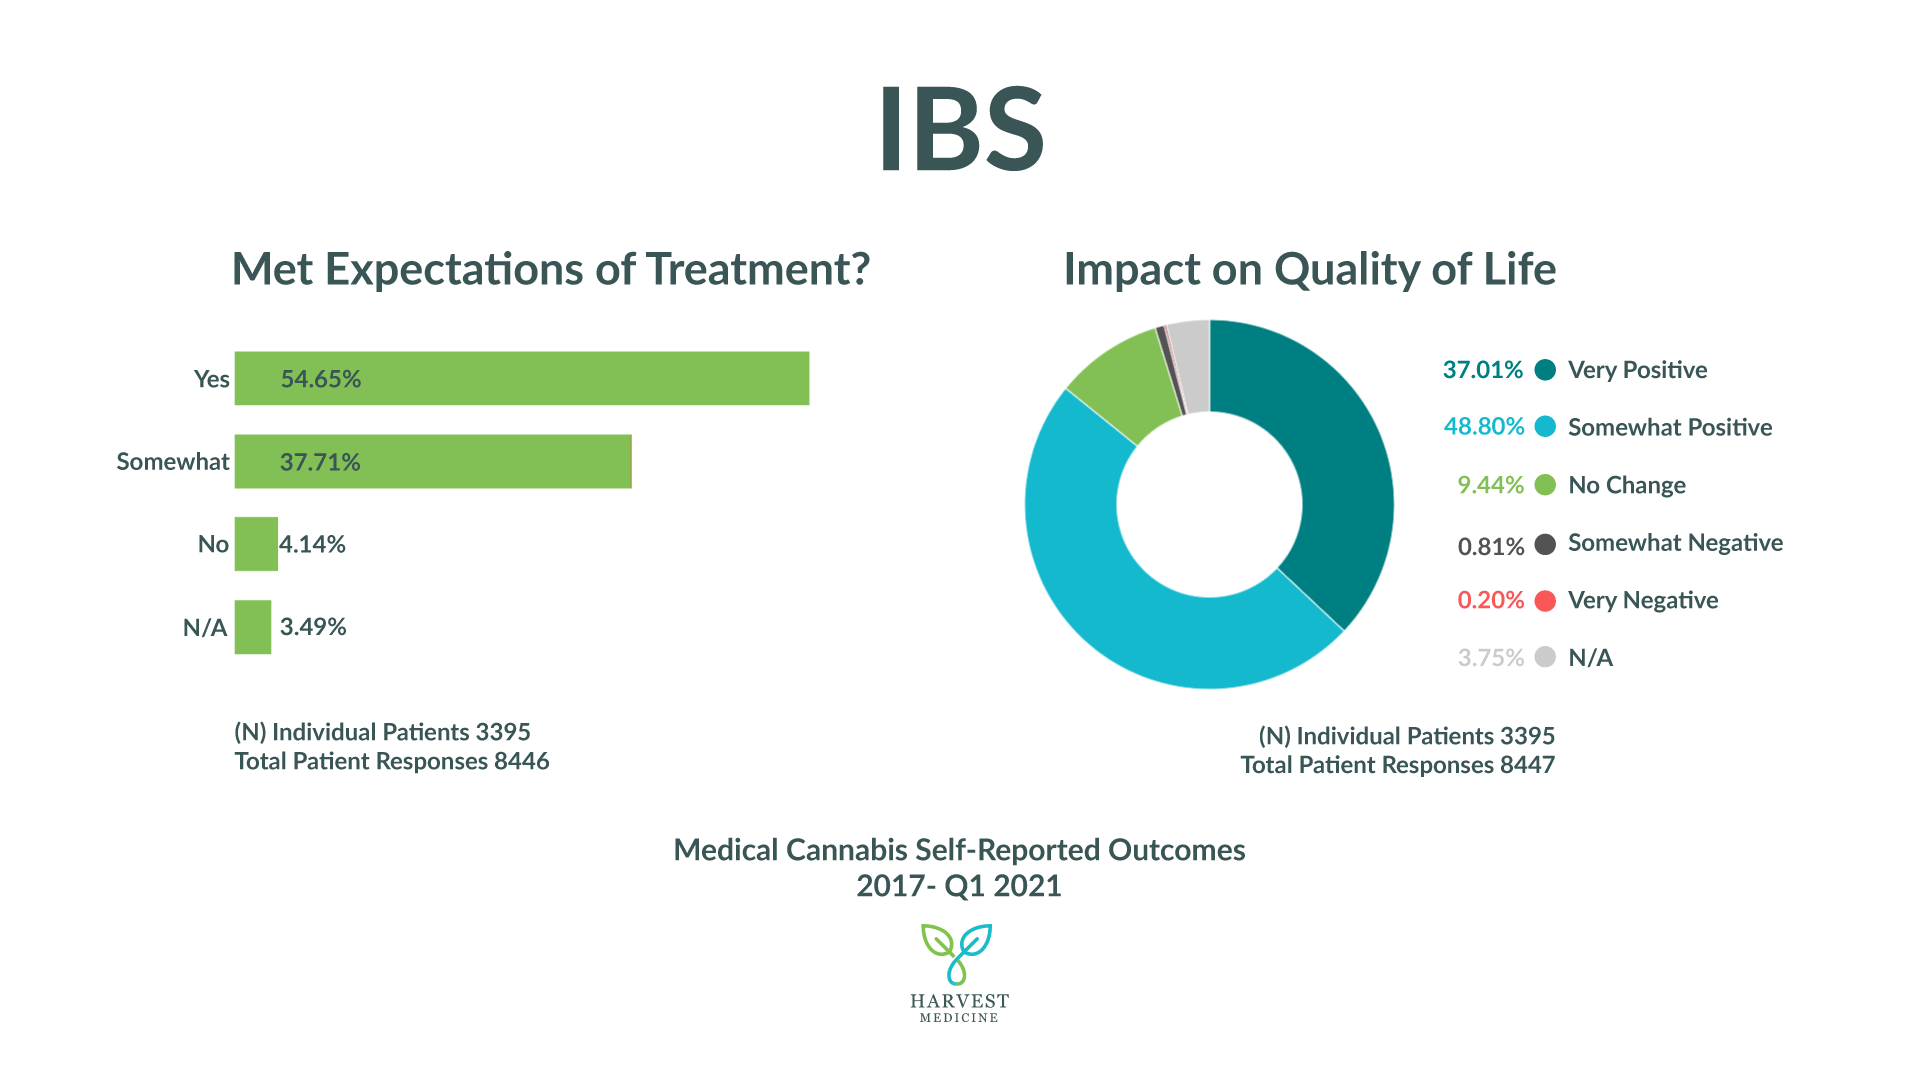 Harvest Medicine's patient self-reported outcomes for irritable bowel syndrome from 2017-2021. Sample size 3395